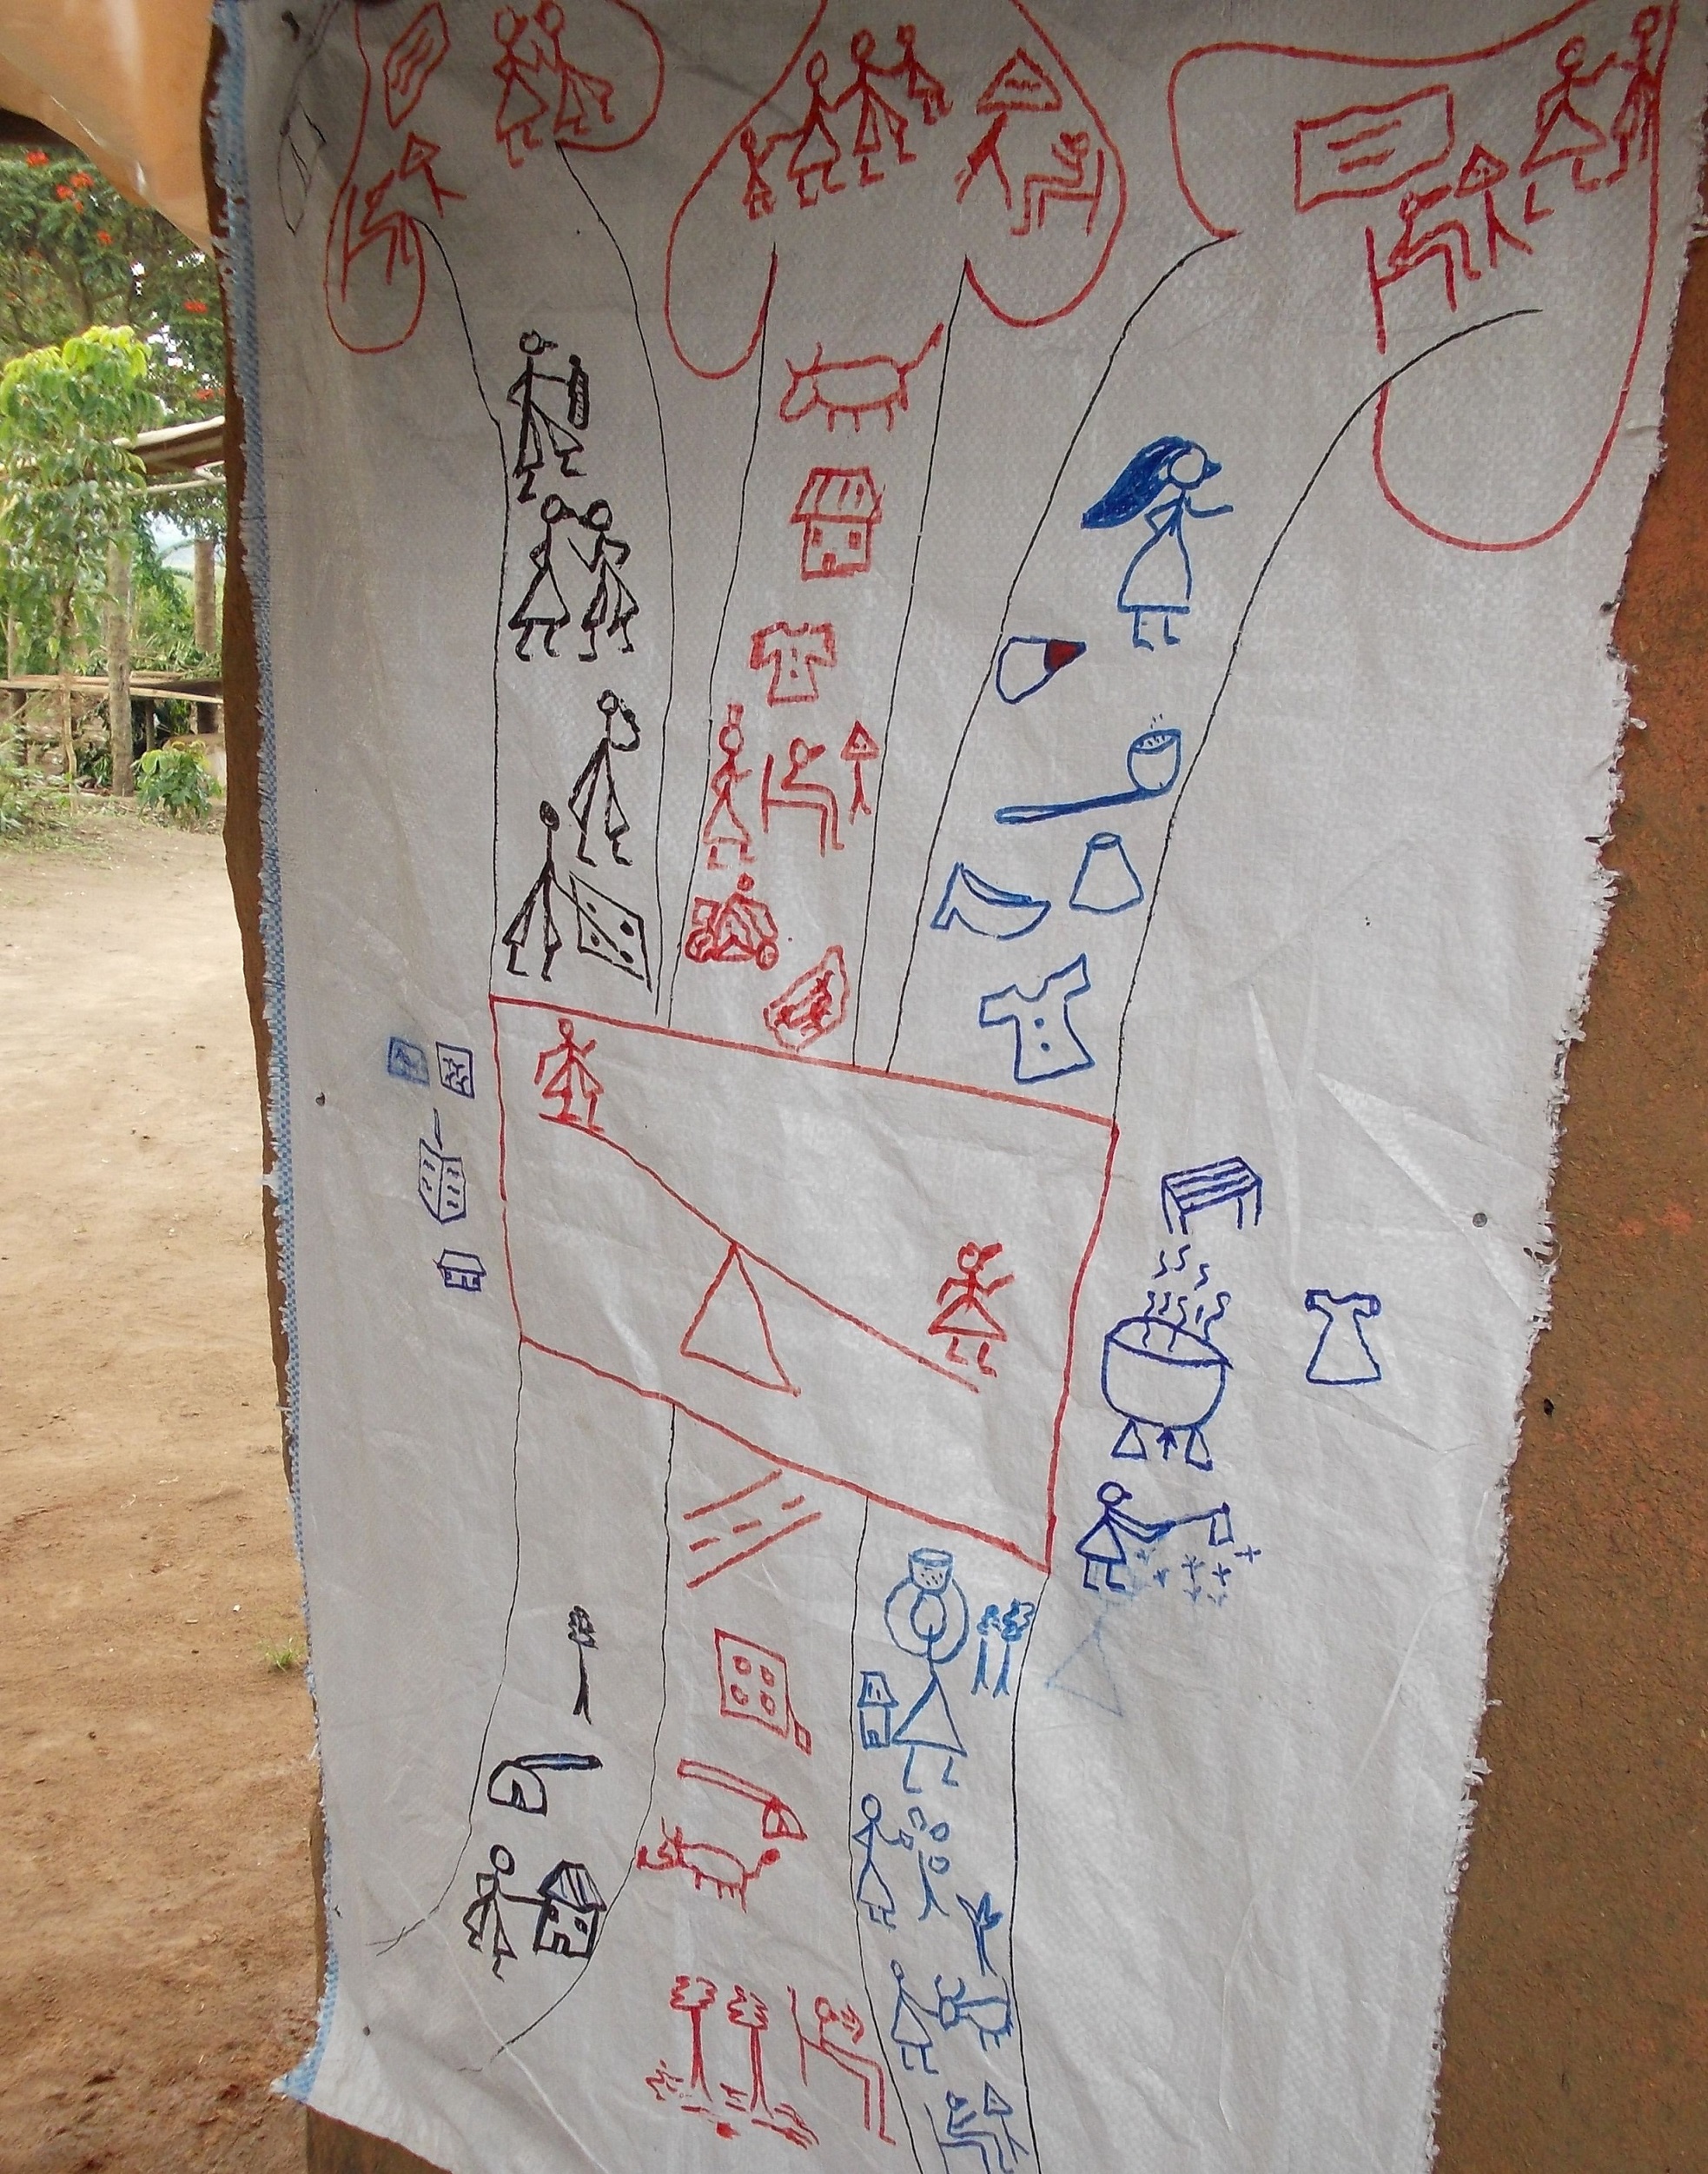 Members of the Kufuna Kwefaako Farmers Group in Uganda visualize the gendered division of labor in their families. Photo: Carsta Neuenroth/Brot für die Welt